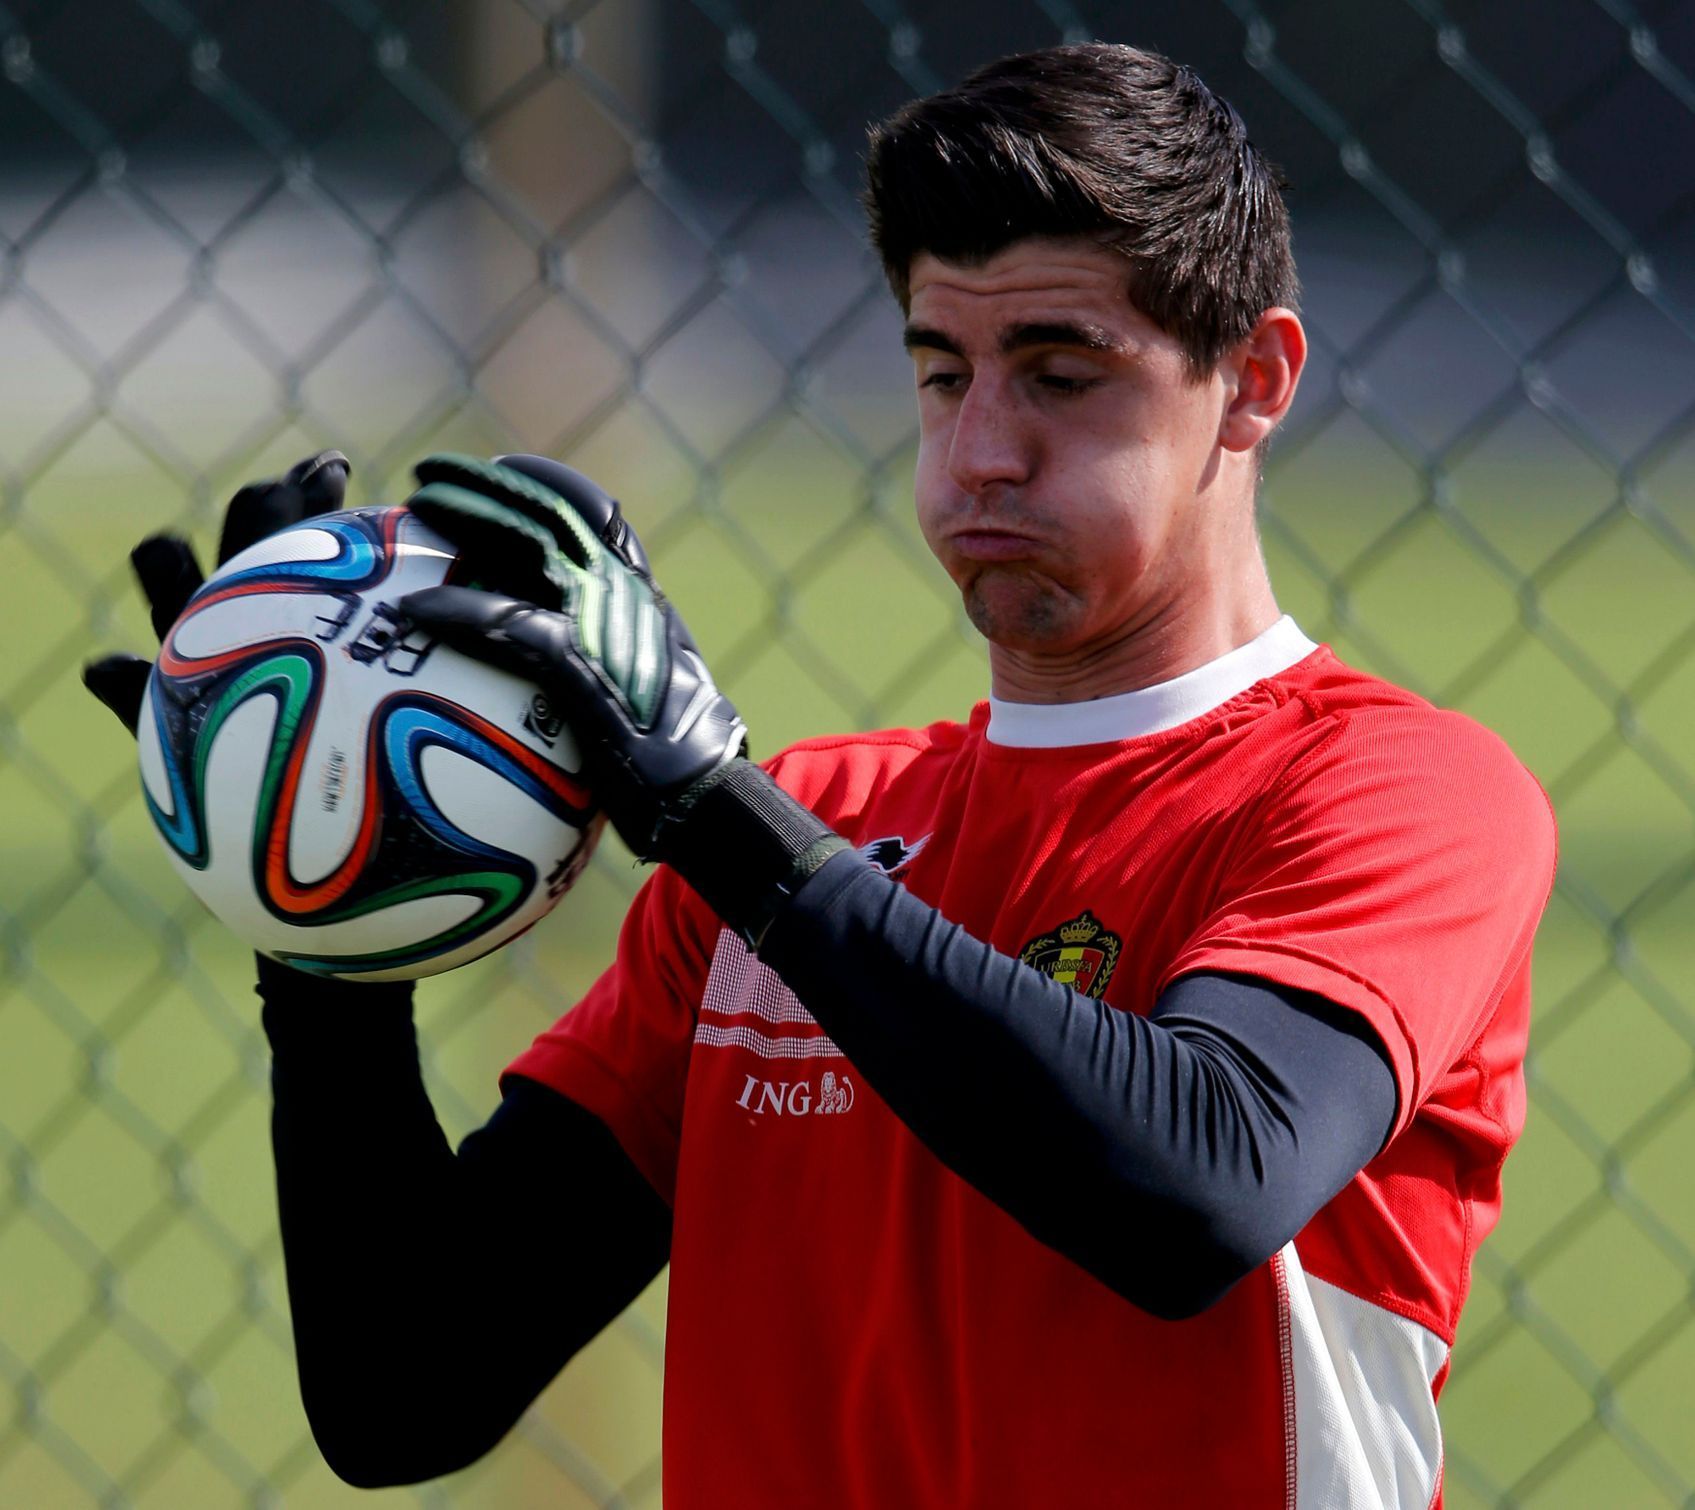 Belgium's national goalkeeper Courtois attends a training session in Mogi das Cruzes